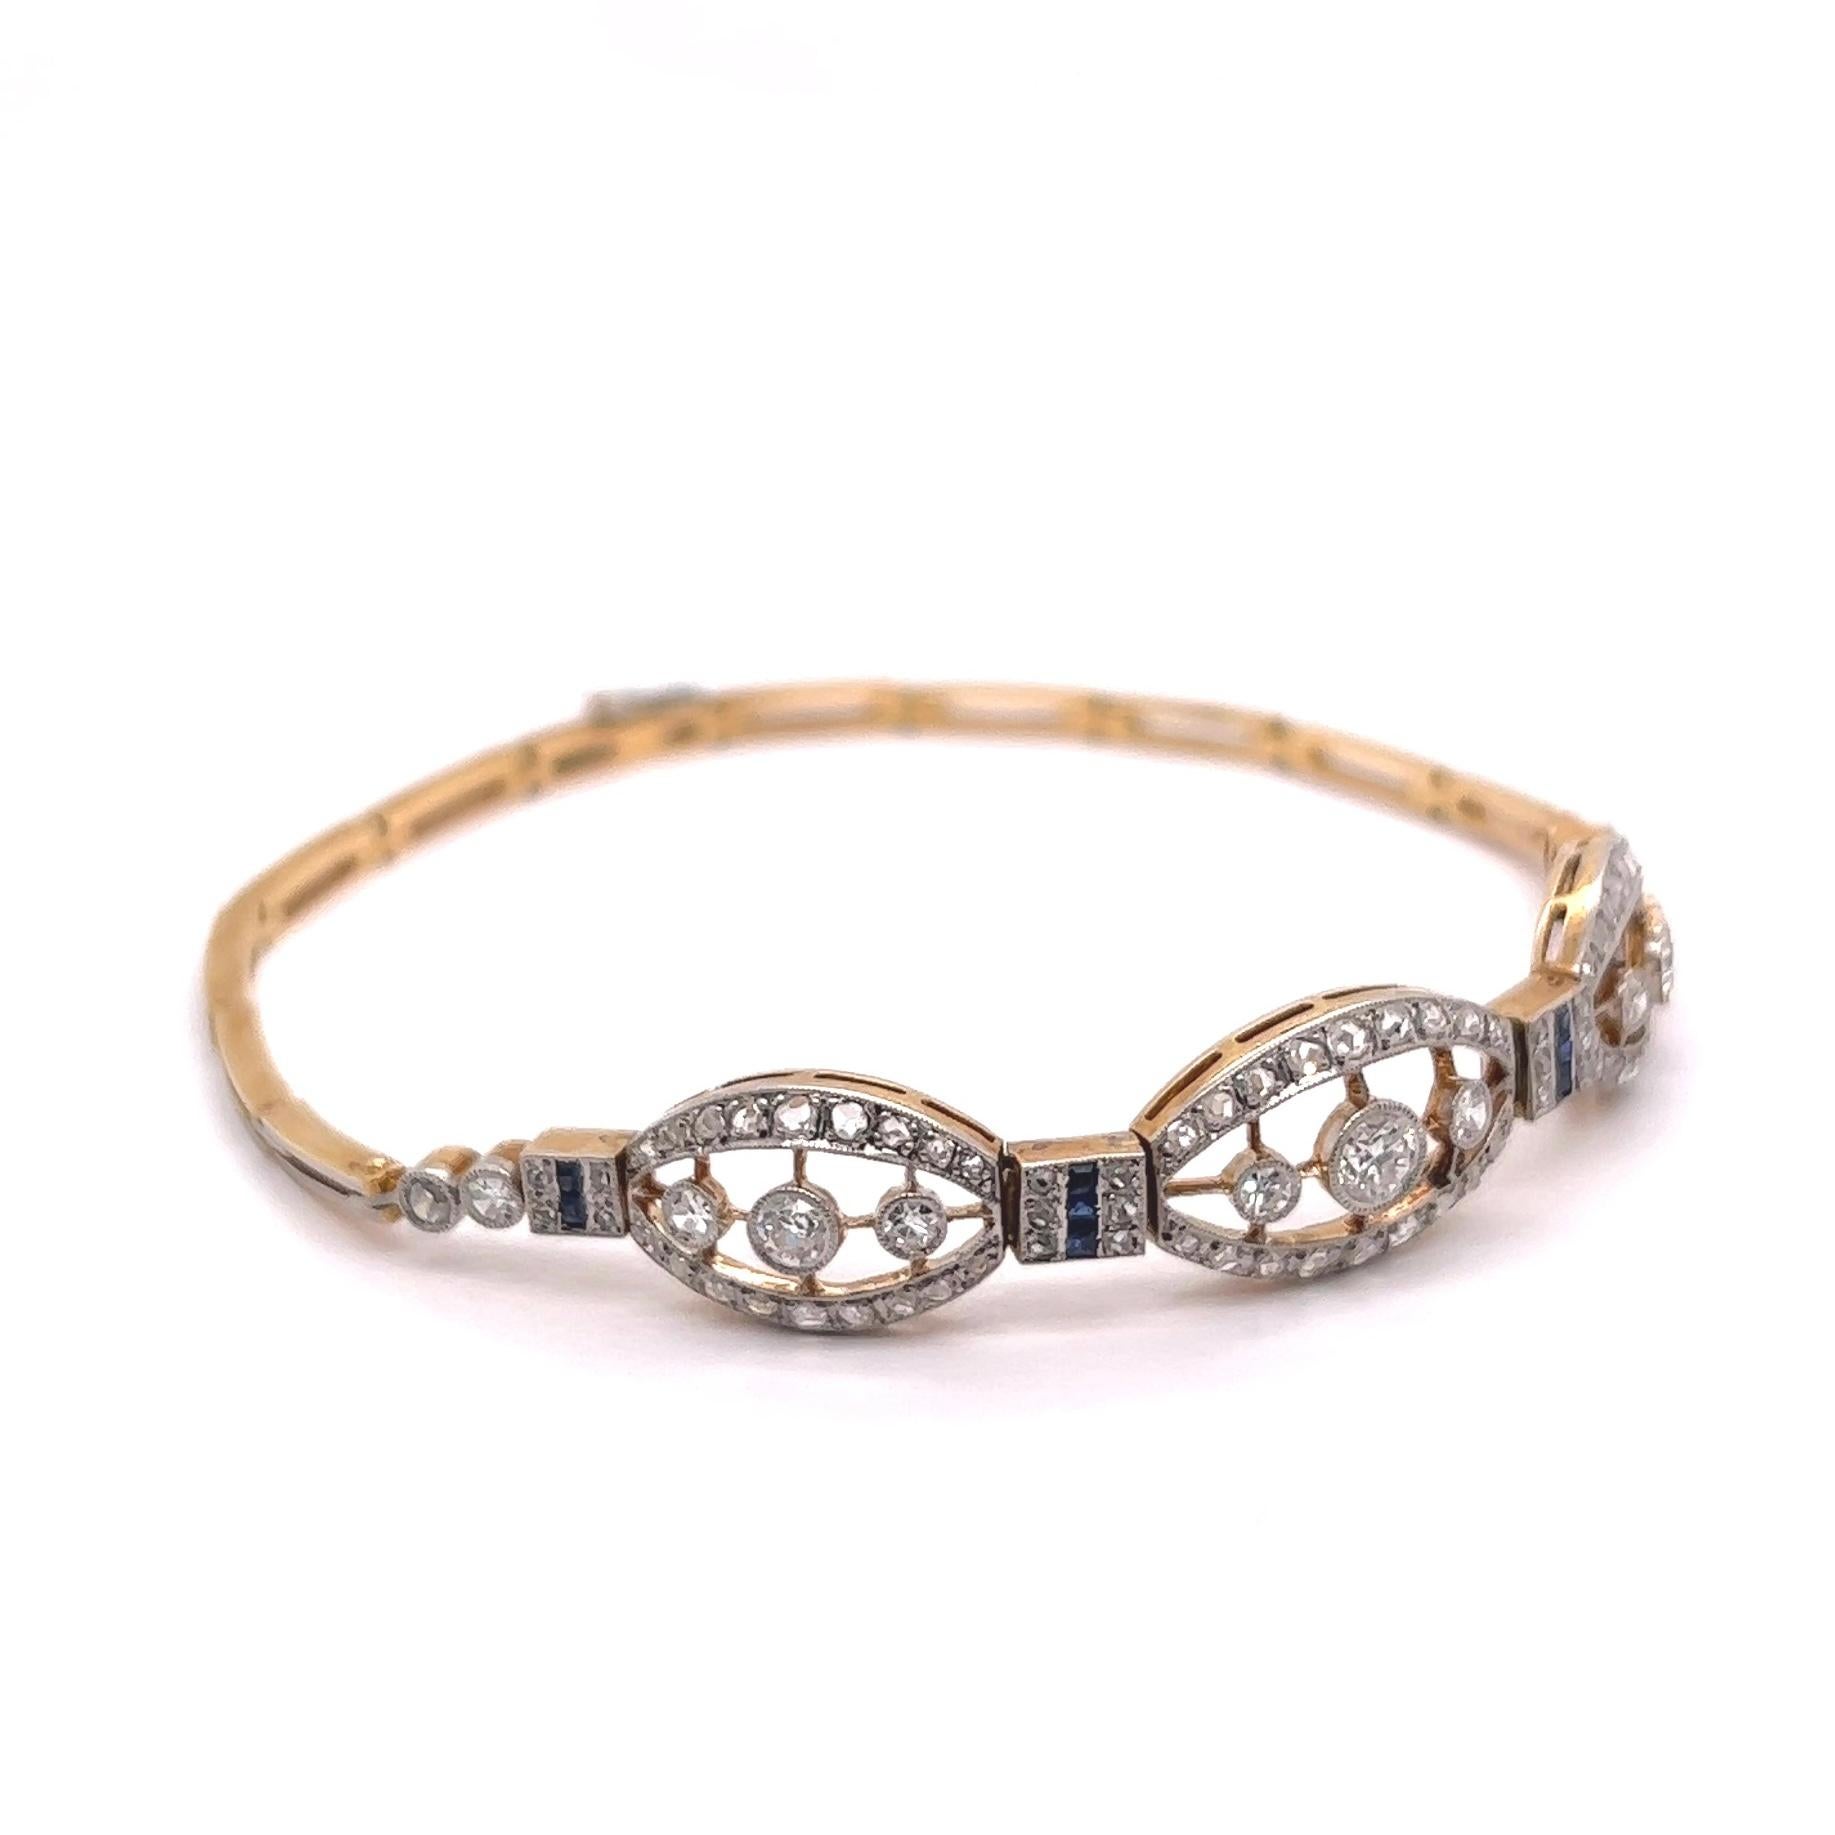 One Antique French Diamond Sapphire 18 Karat Yellow Gold Platinum Bracelet. Featuring three old European cut diamonds with a total weight of approximately 0.35 carat, and ten single cut diamonds with a total weight of approximately 0.50 carat,